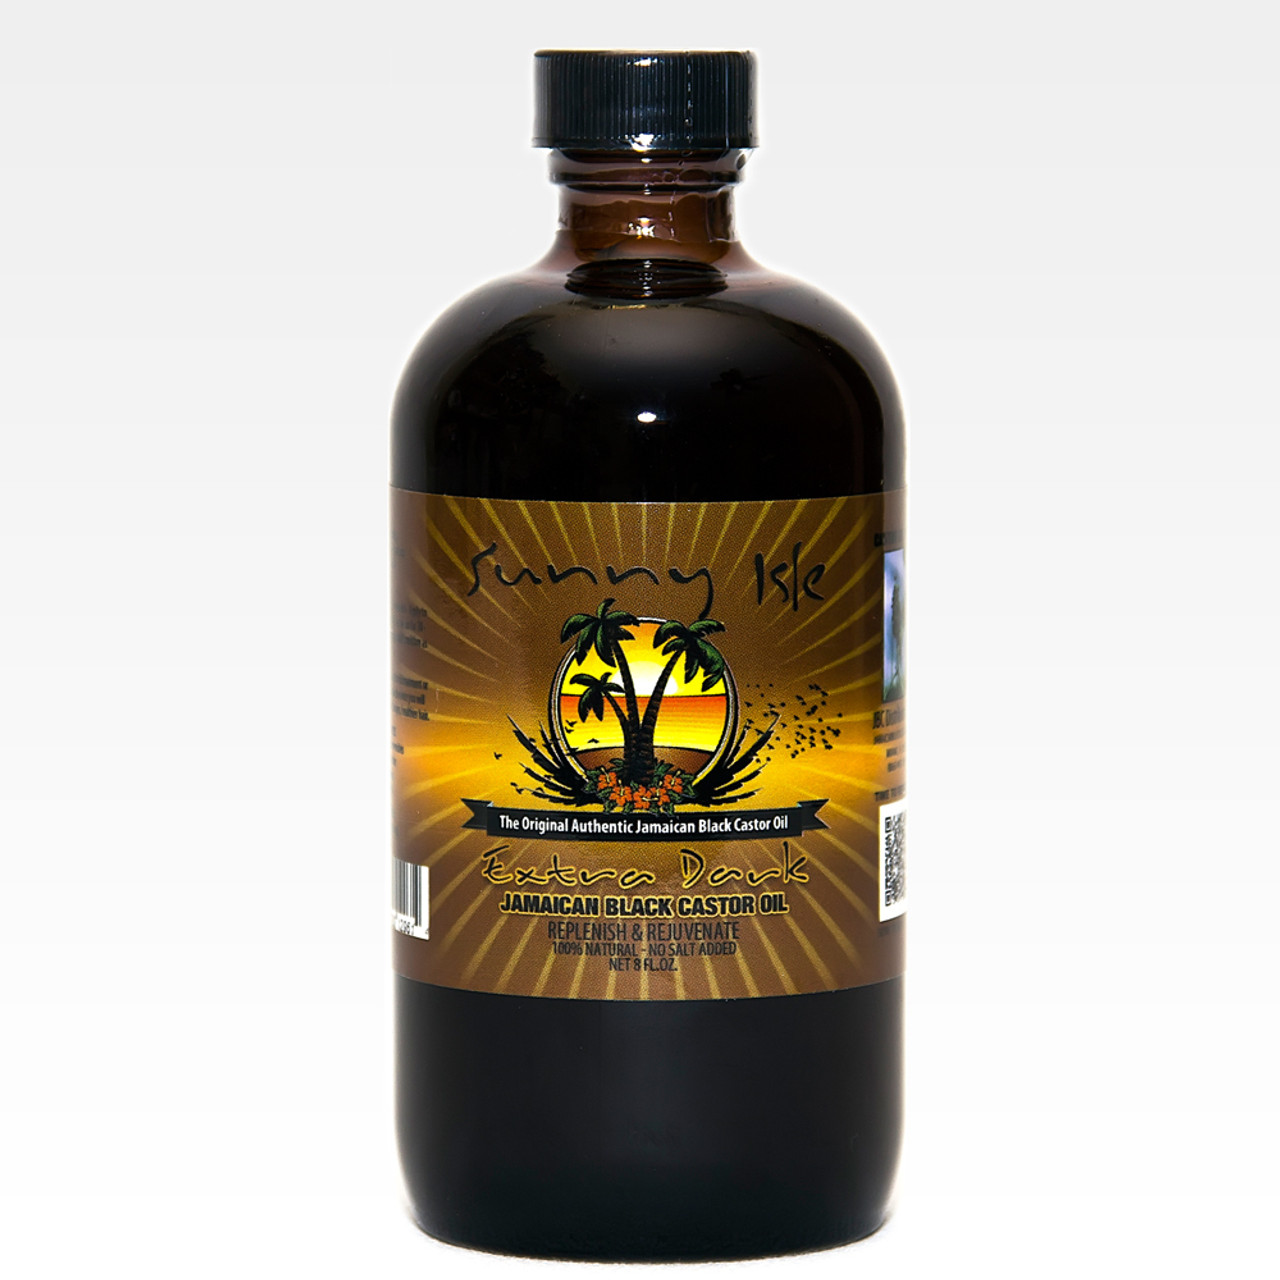 Shop now for Extra Dark Jamaican Black Castor Oil, 100% Authentic Pure Jamaican Black Castor Oil (Sunny Isle Extra Dark) For Hair Growth, Where can I find in St. Louis, MO Alopecia treatments, Thinning Hair, Hair Loss at Everyday Low Price. Where you can find product information, buy, ratings, reviews for Sunny Isle Extra Dark Jamaican Black Castor Oil for hair growth to iShopNaturals.com